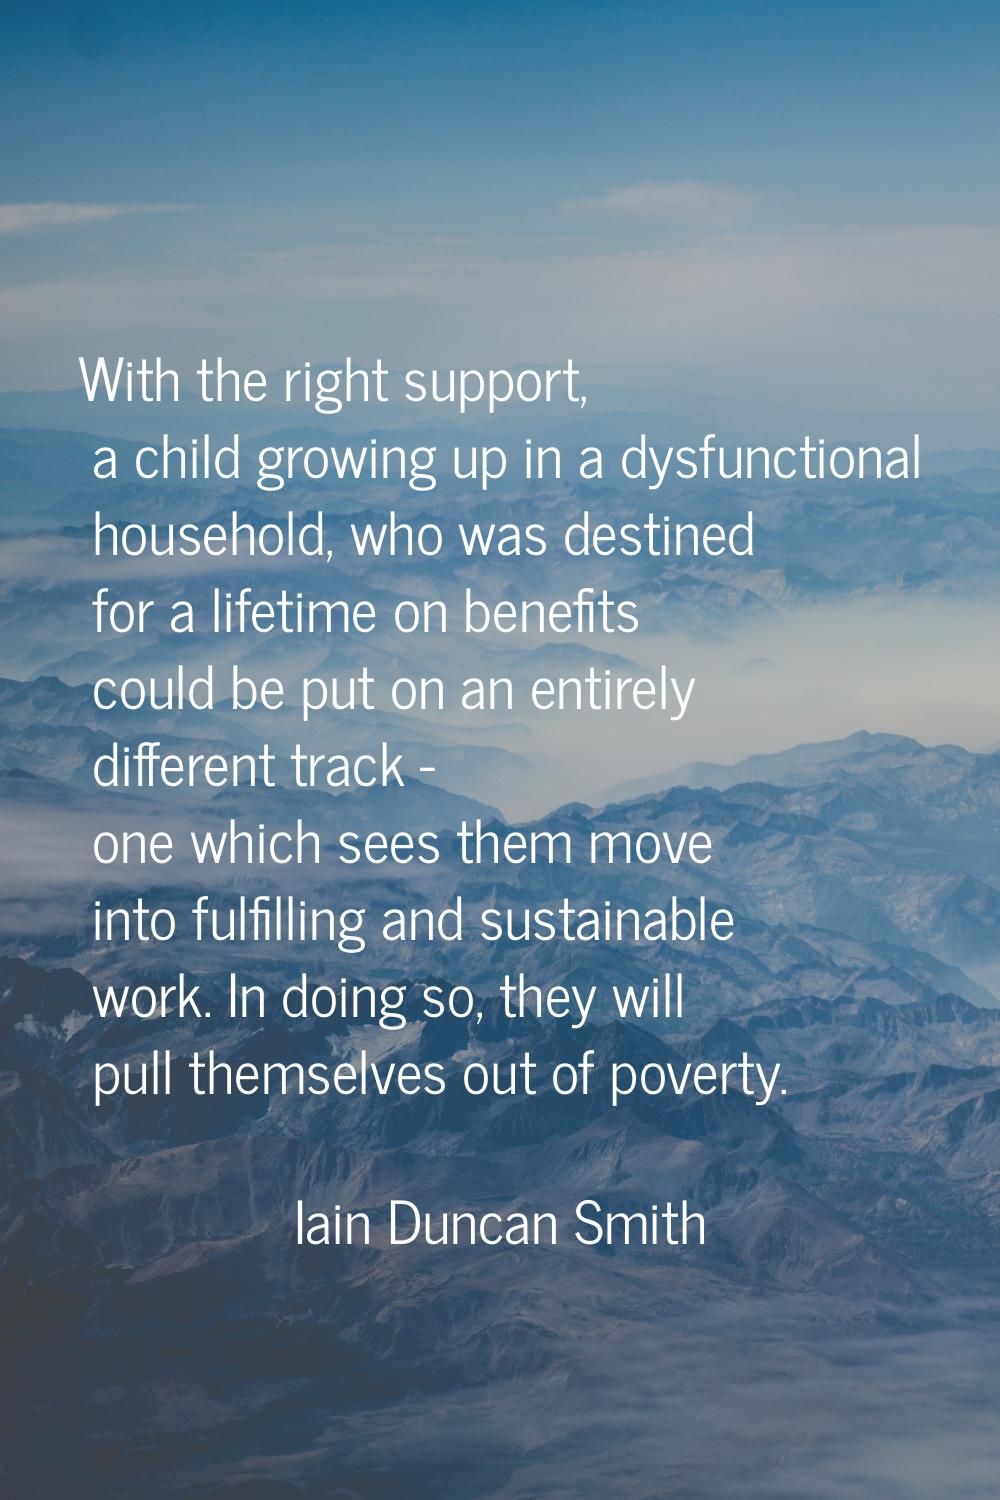 With the right support, a child growing up in a dysfunctional household, who was destined for a lif